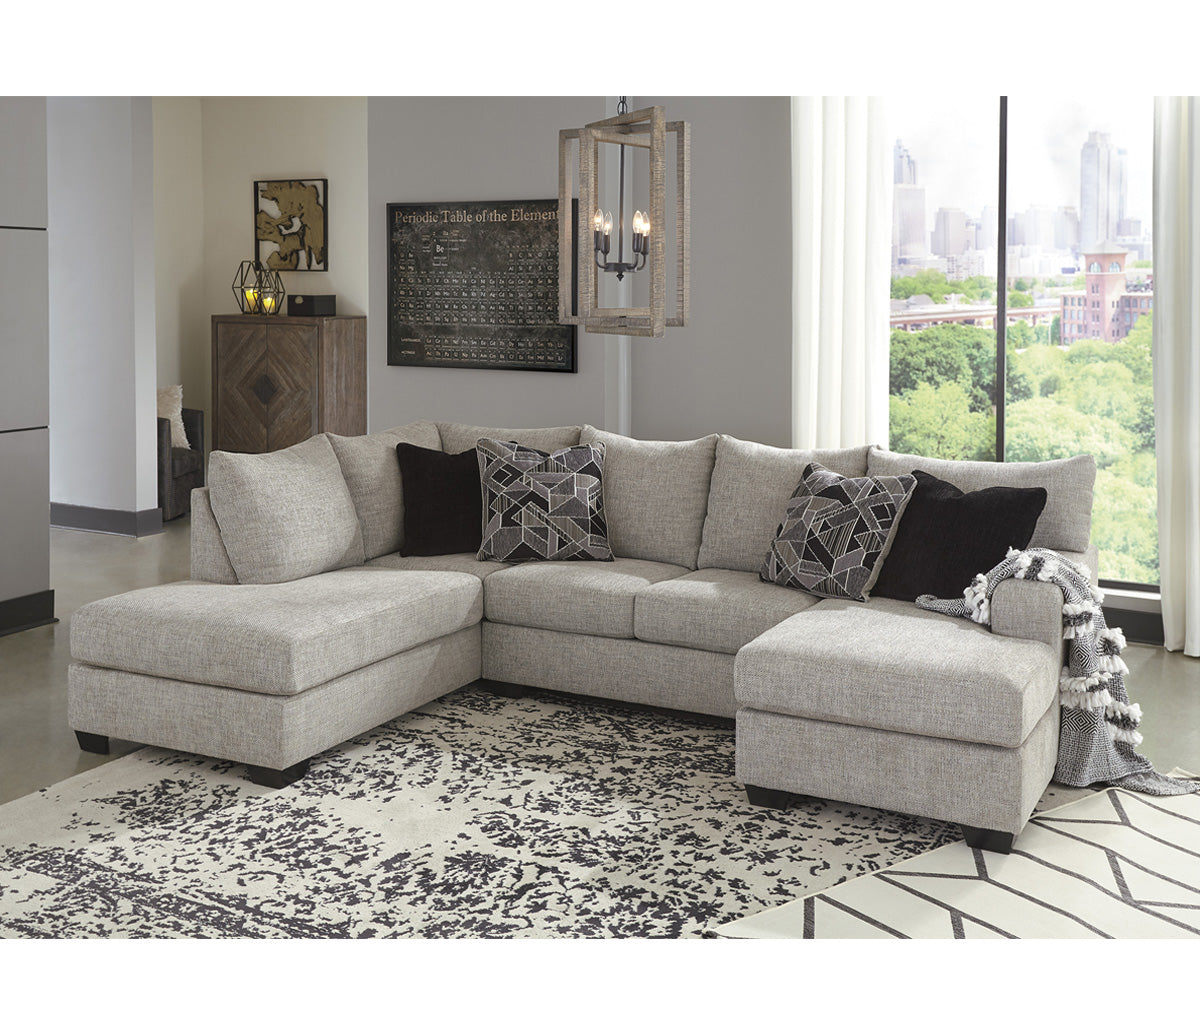 Storm 2 Piece Sectional - Grey Fabric  Buy Online or Jag's Furniture  Stores, Langley, Abbotsford, Online, Coquitlam, Aldergrove, Chilliwack –  Jag's Furniture & Mattress